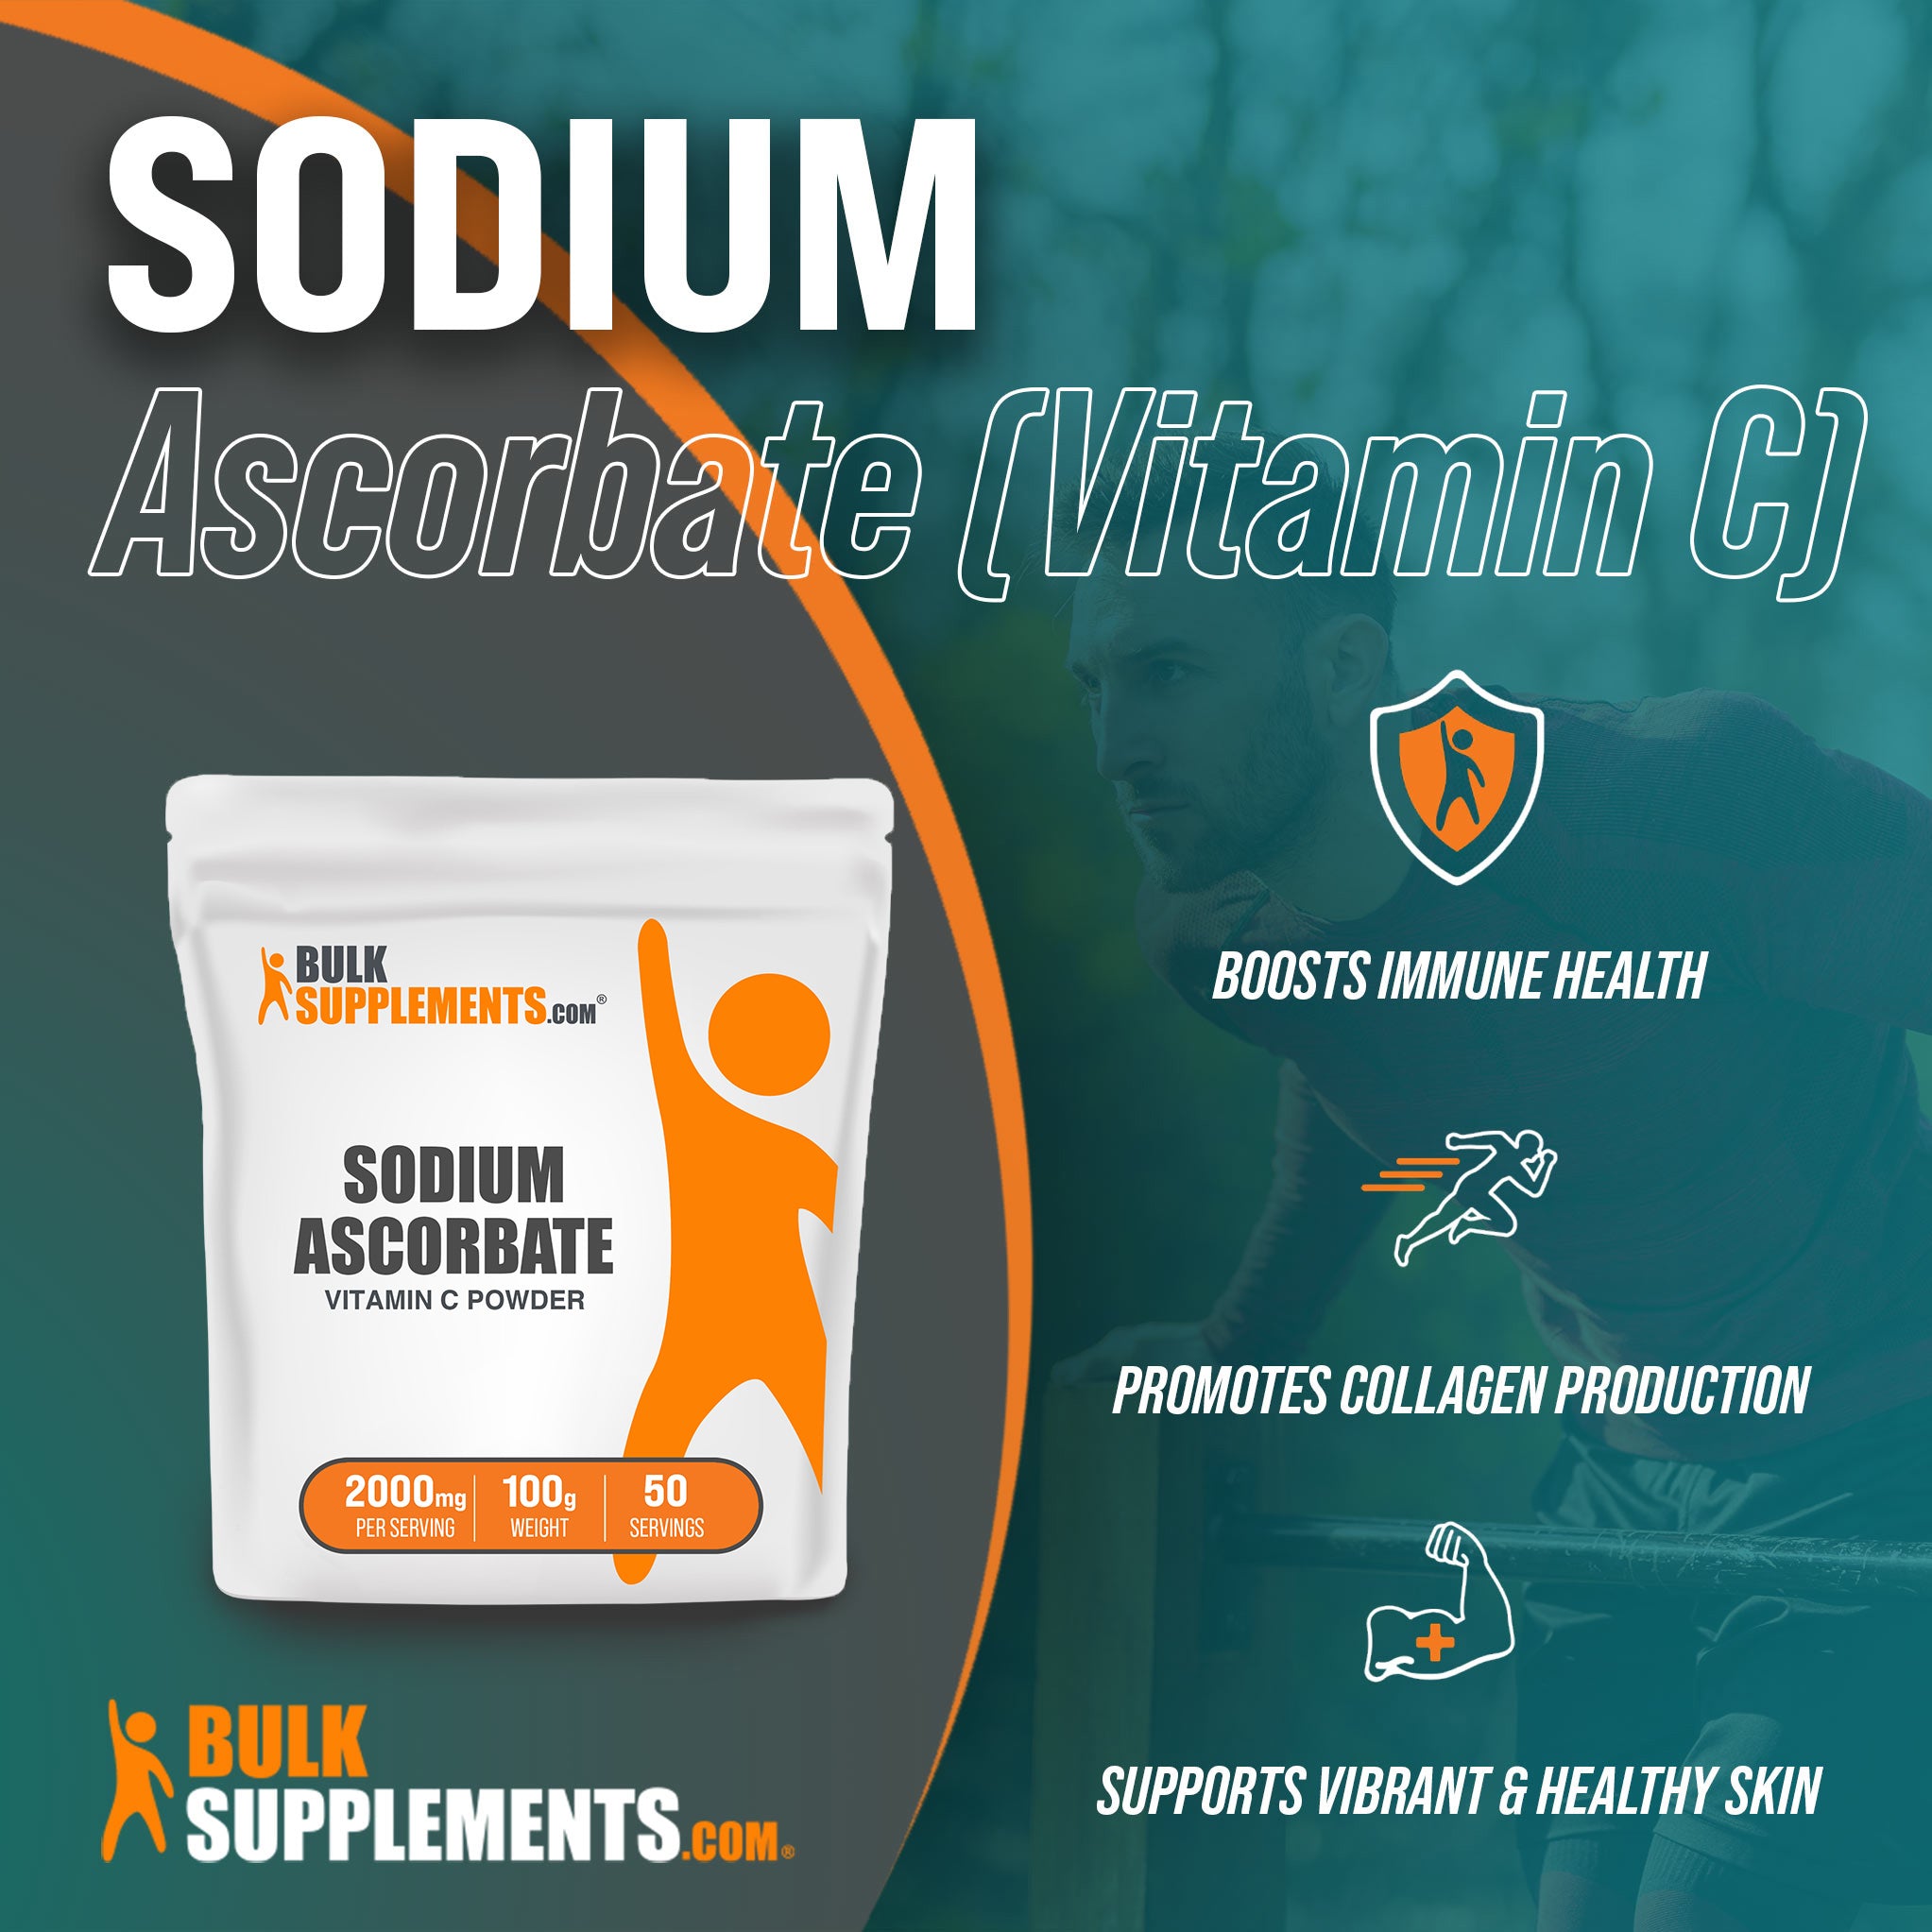 Benefits of Sodium Ascorbate Vitamin C: boosts immune health, promotes collagen production, supports vibrant and healthy skin